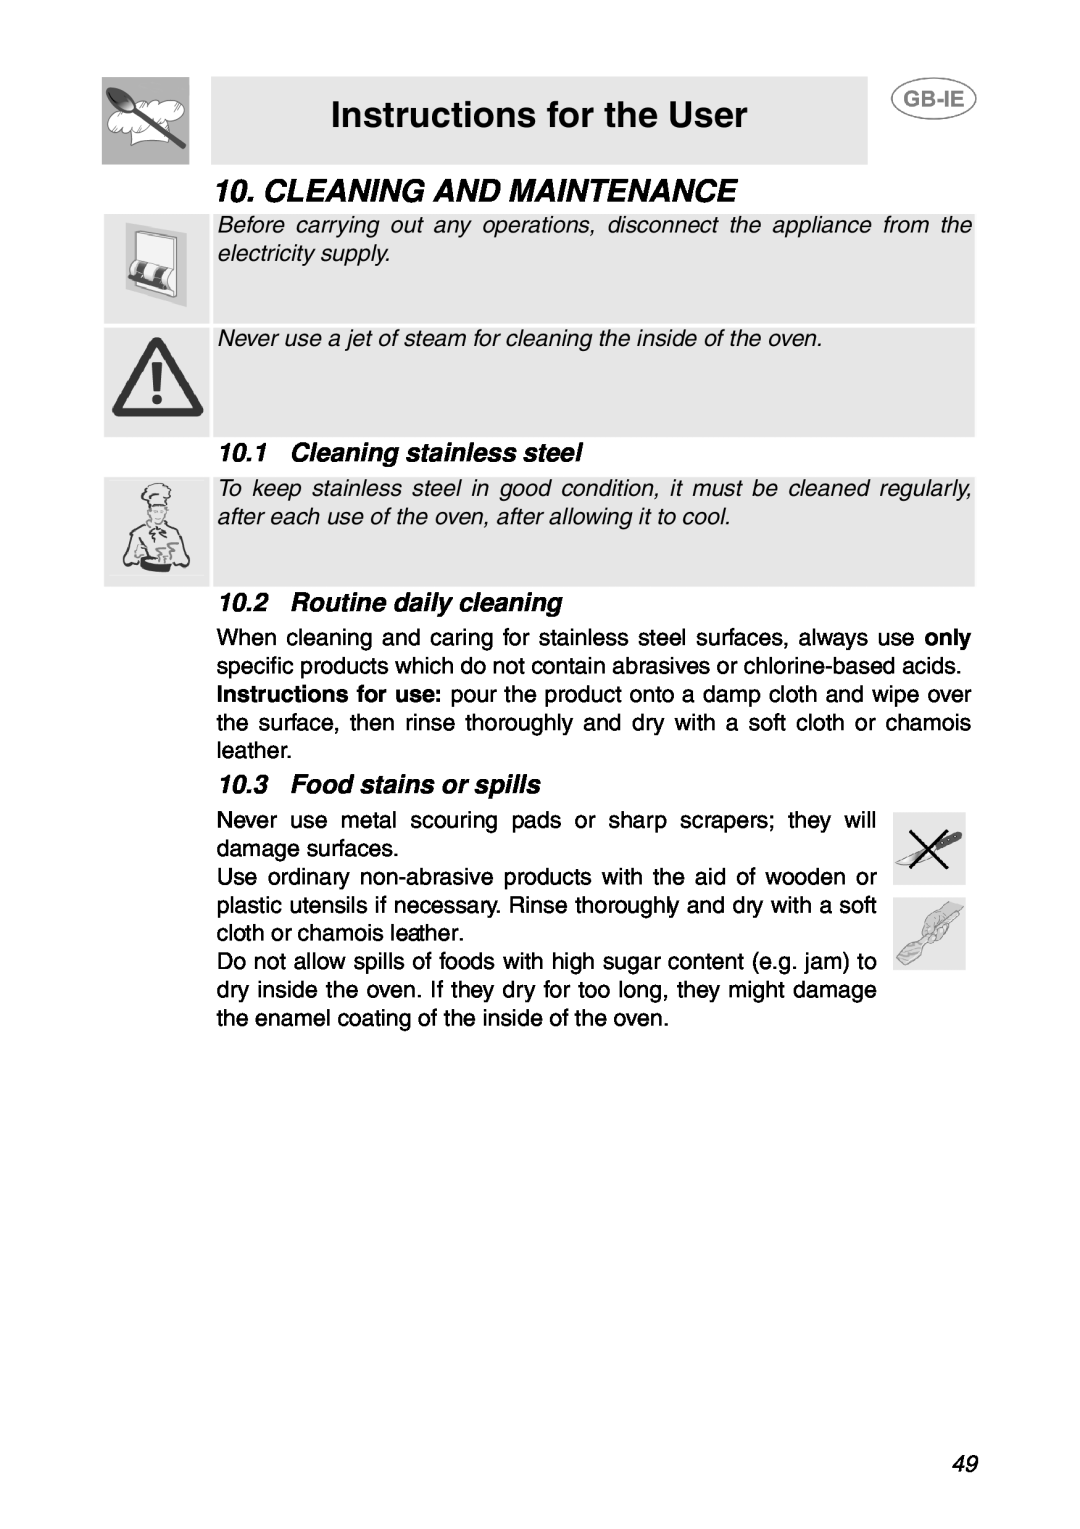 Smeg SCP108SG manual Cleaning And Maintenance, Instructions for the User, Cleaning stainless steel, Routine daily cleaning 